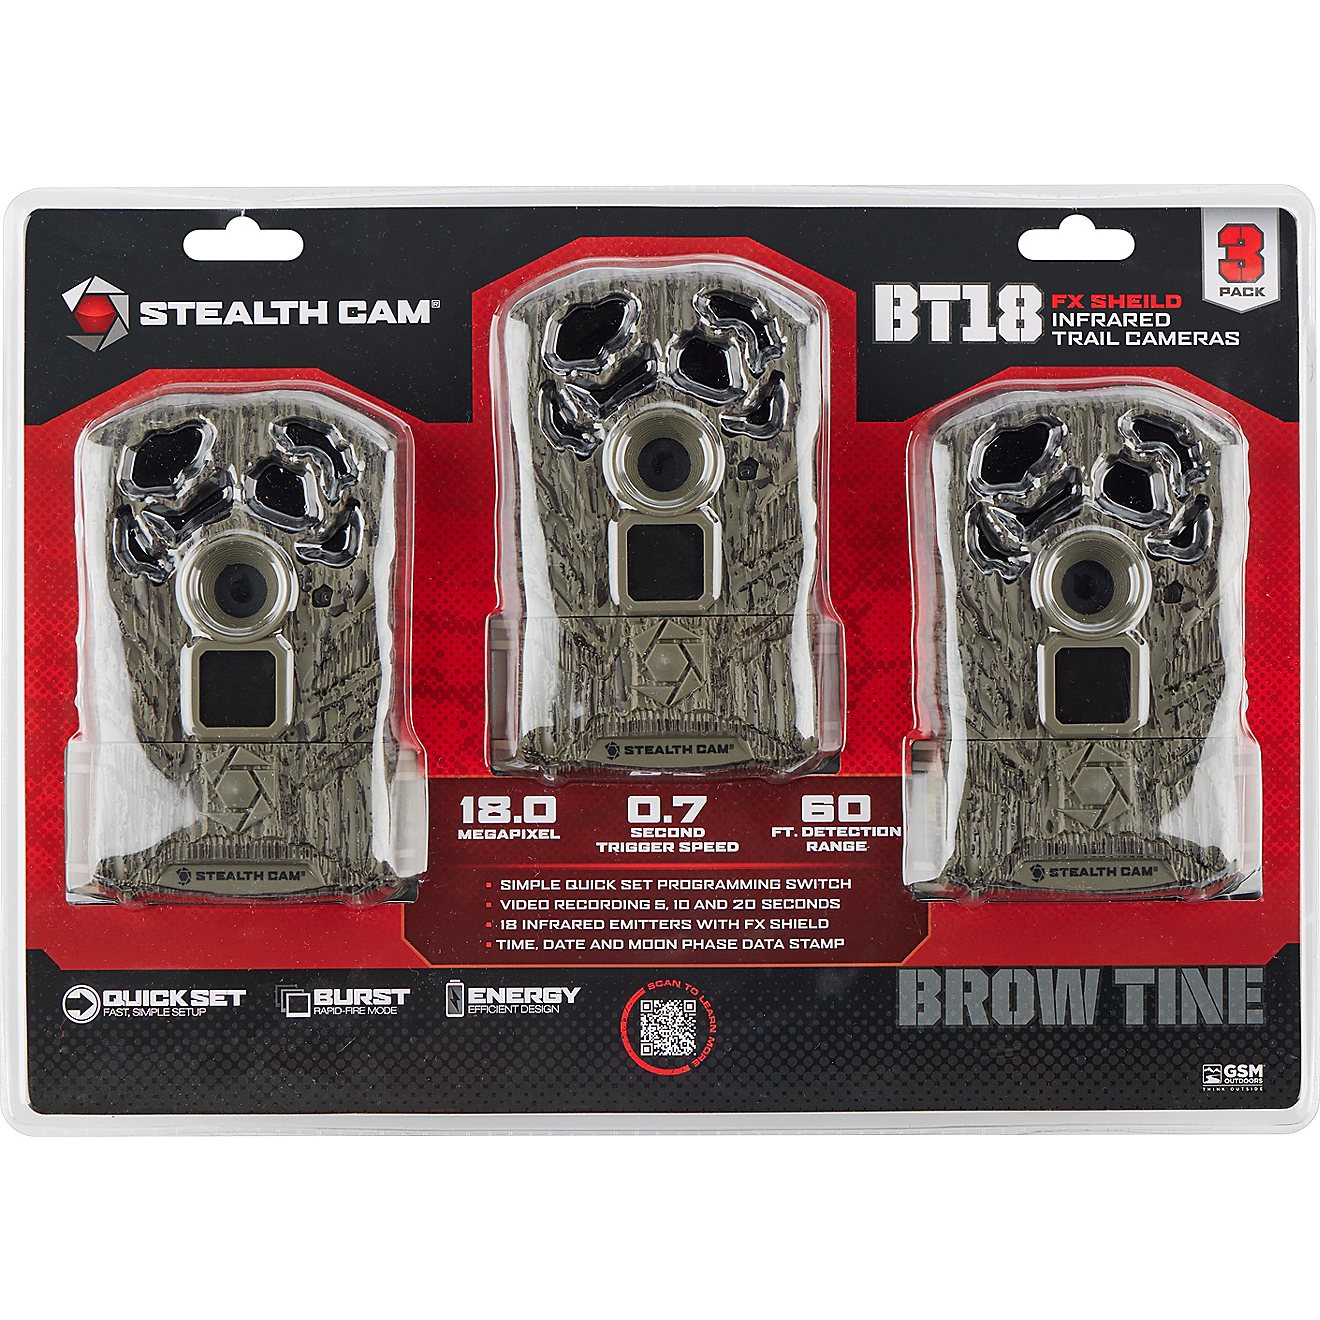 Stealth Cam Browtine 18 MP 3-Pack Trail Camera                                                                                   - view number 1